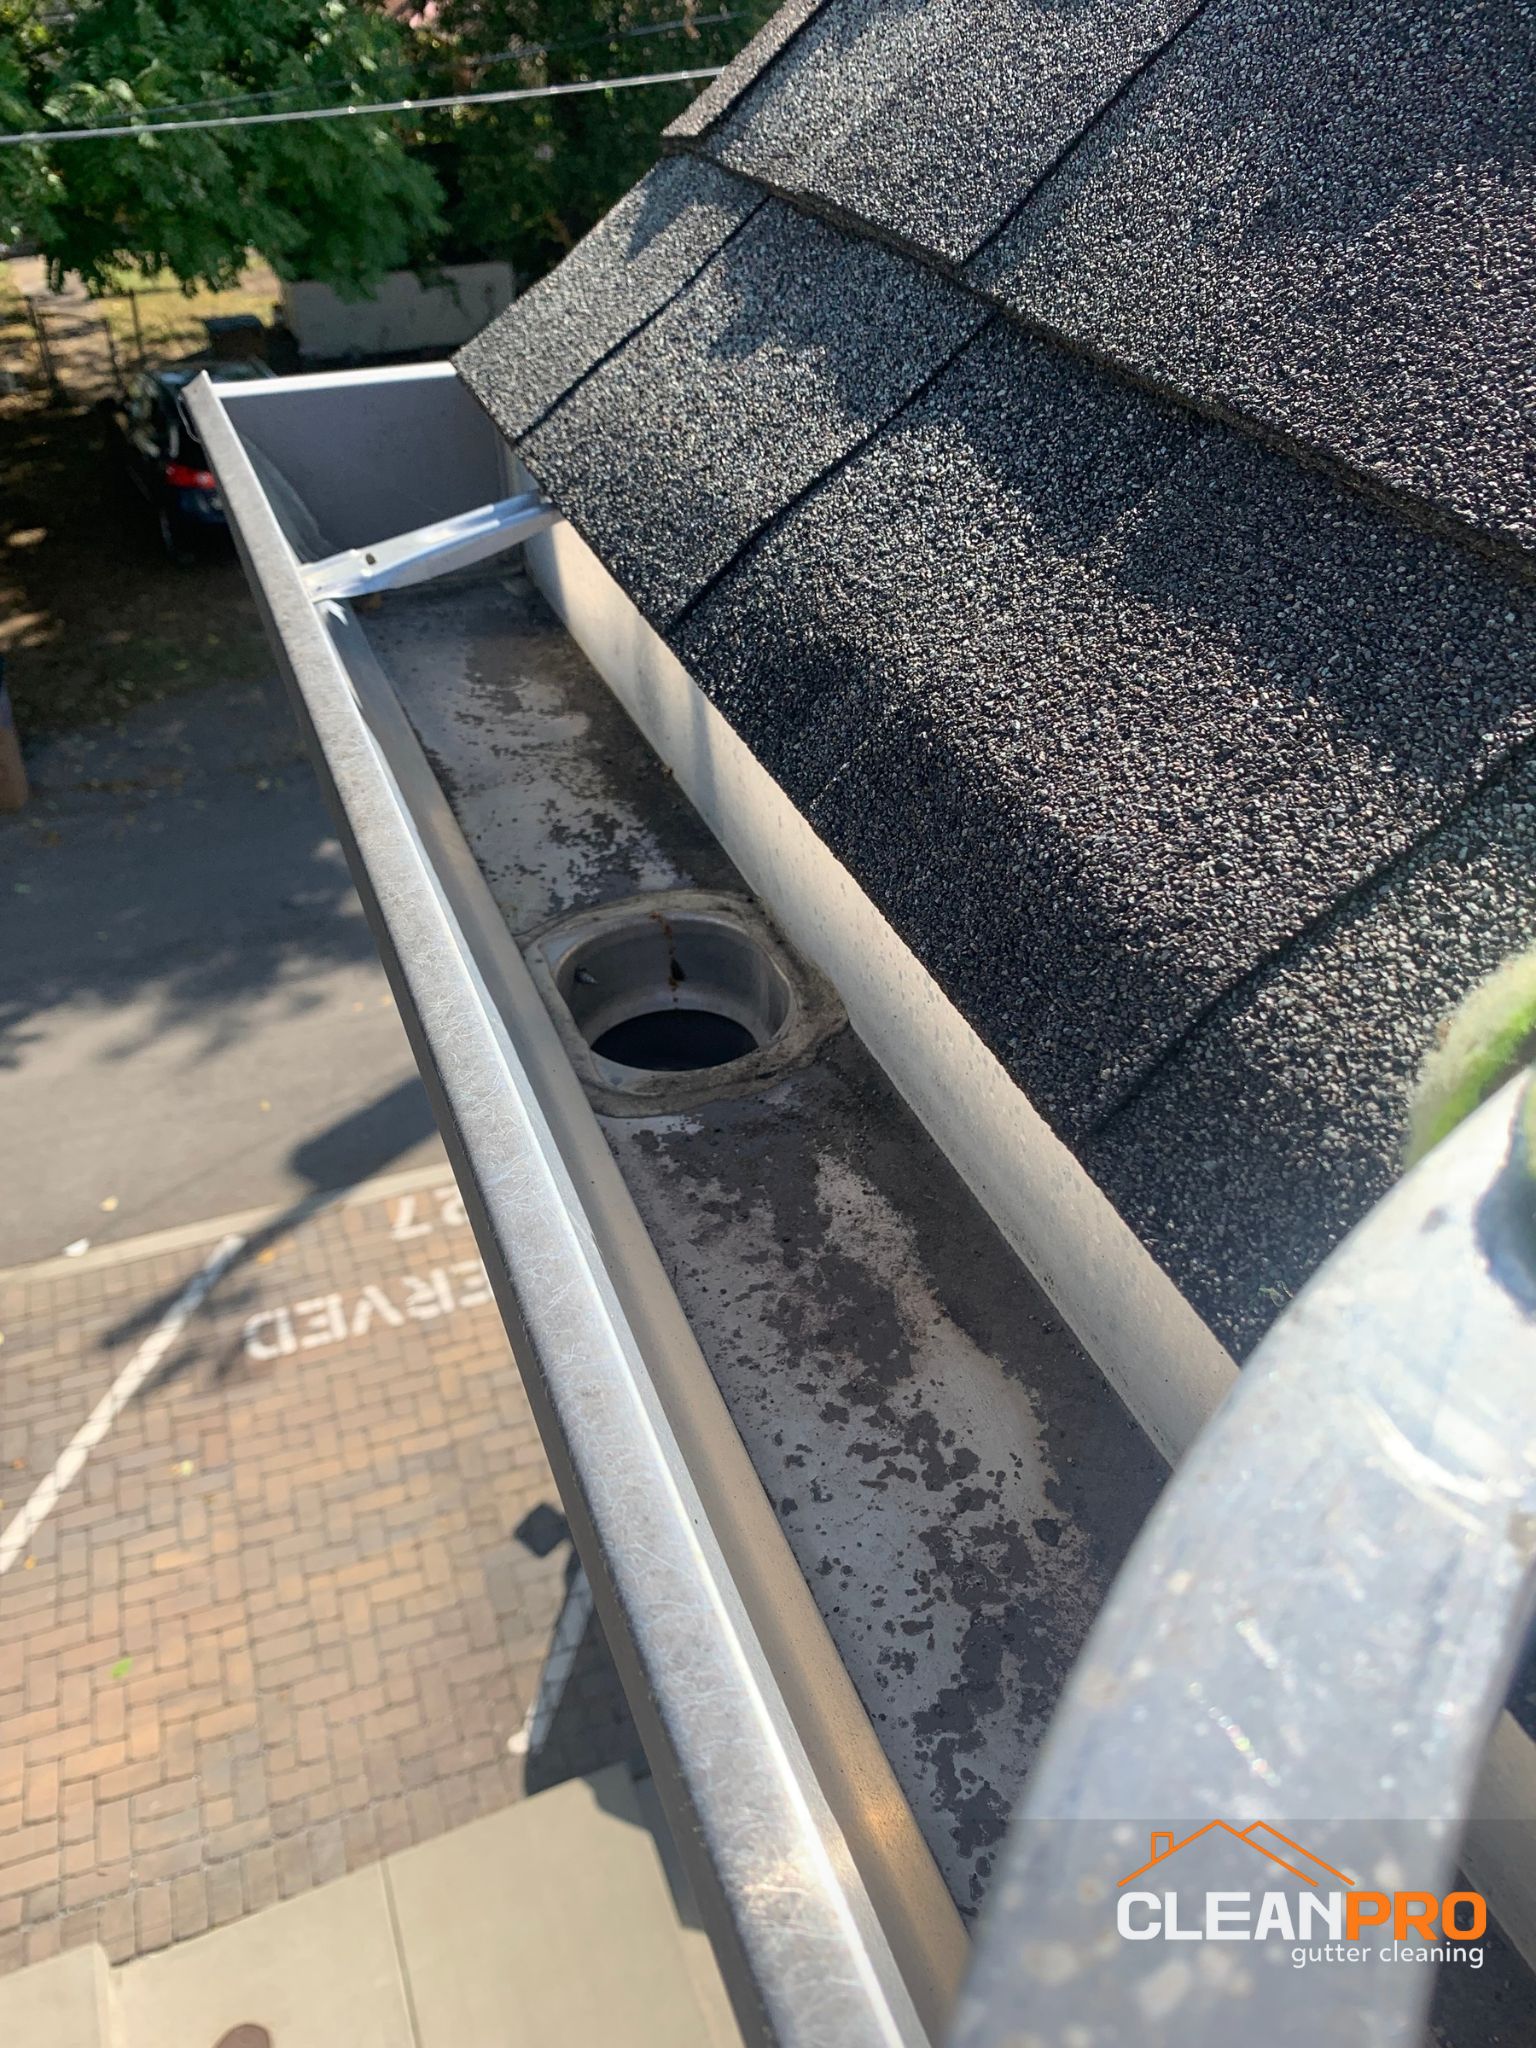 Top Notch Gutter Cleaning Service in Nashville